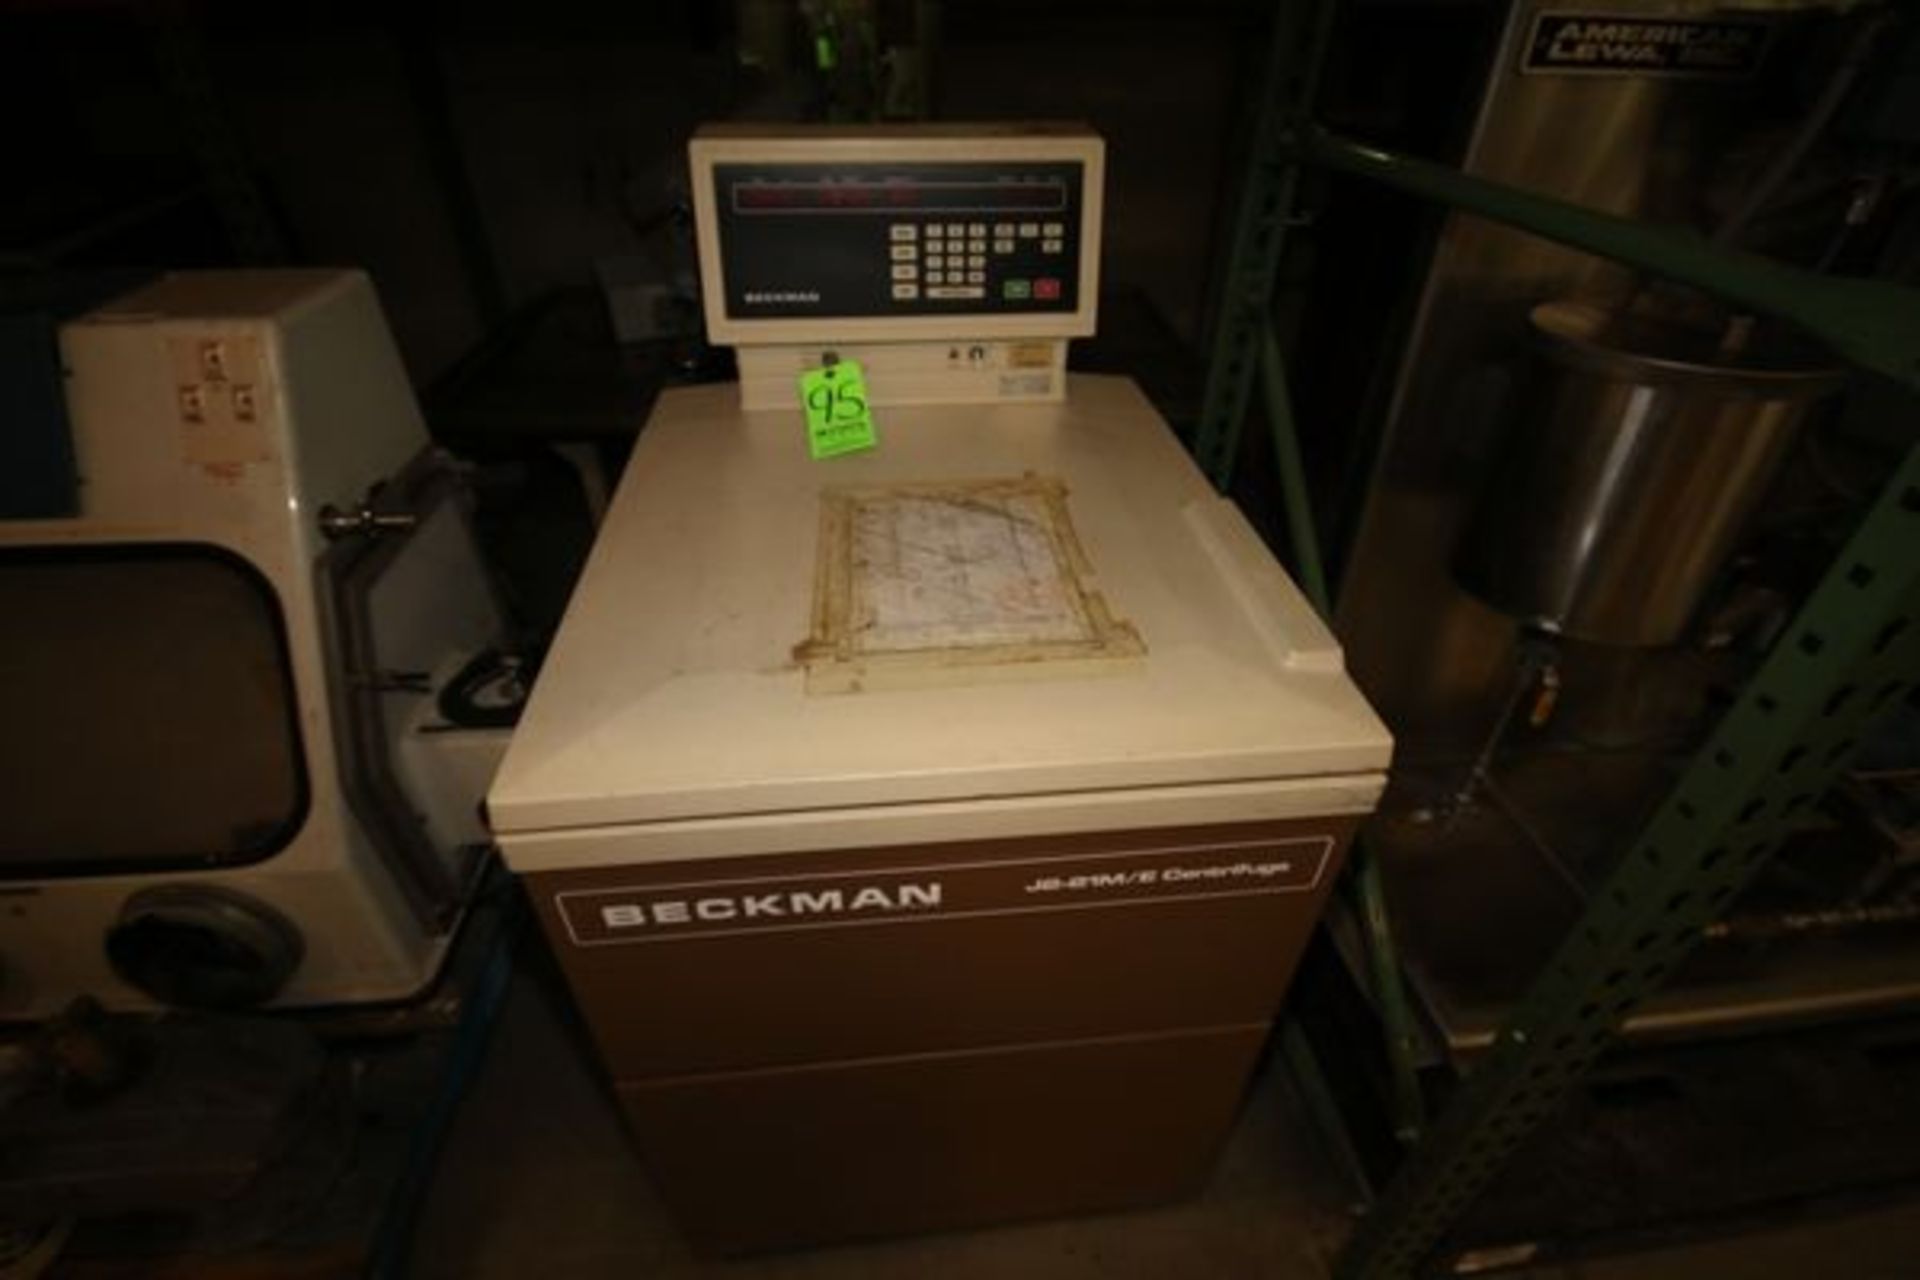 Beckman J2-21M/E Centrifuge, S/N J2K815, Overall Dimensions: 32" L x 28" W x 51 1/2" H - Image 3 of 3